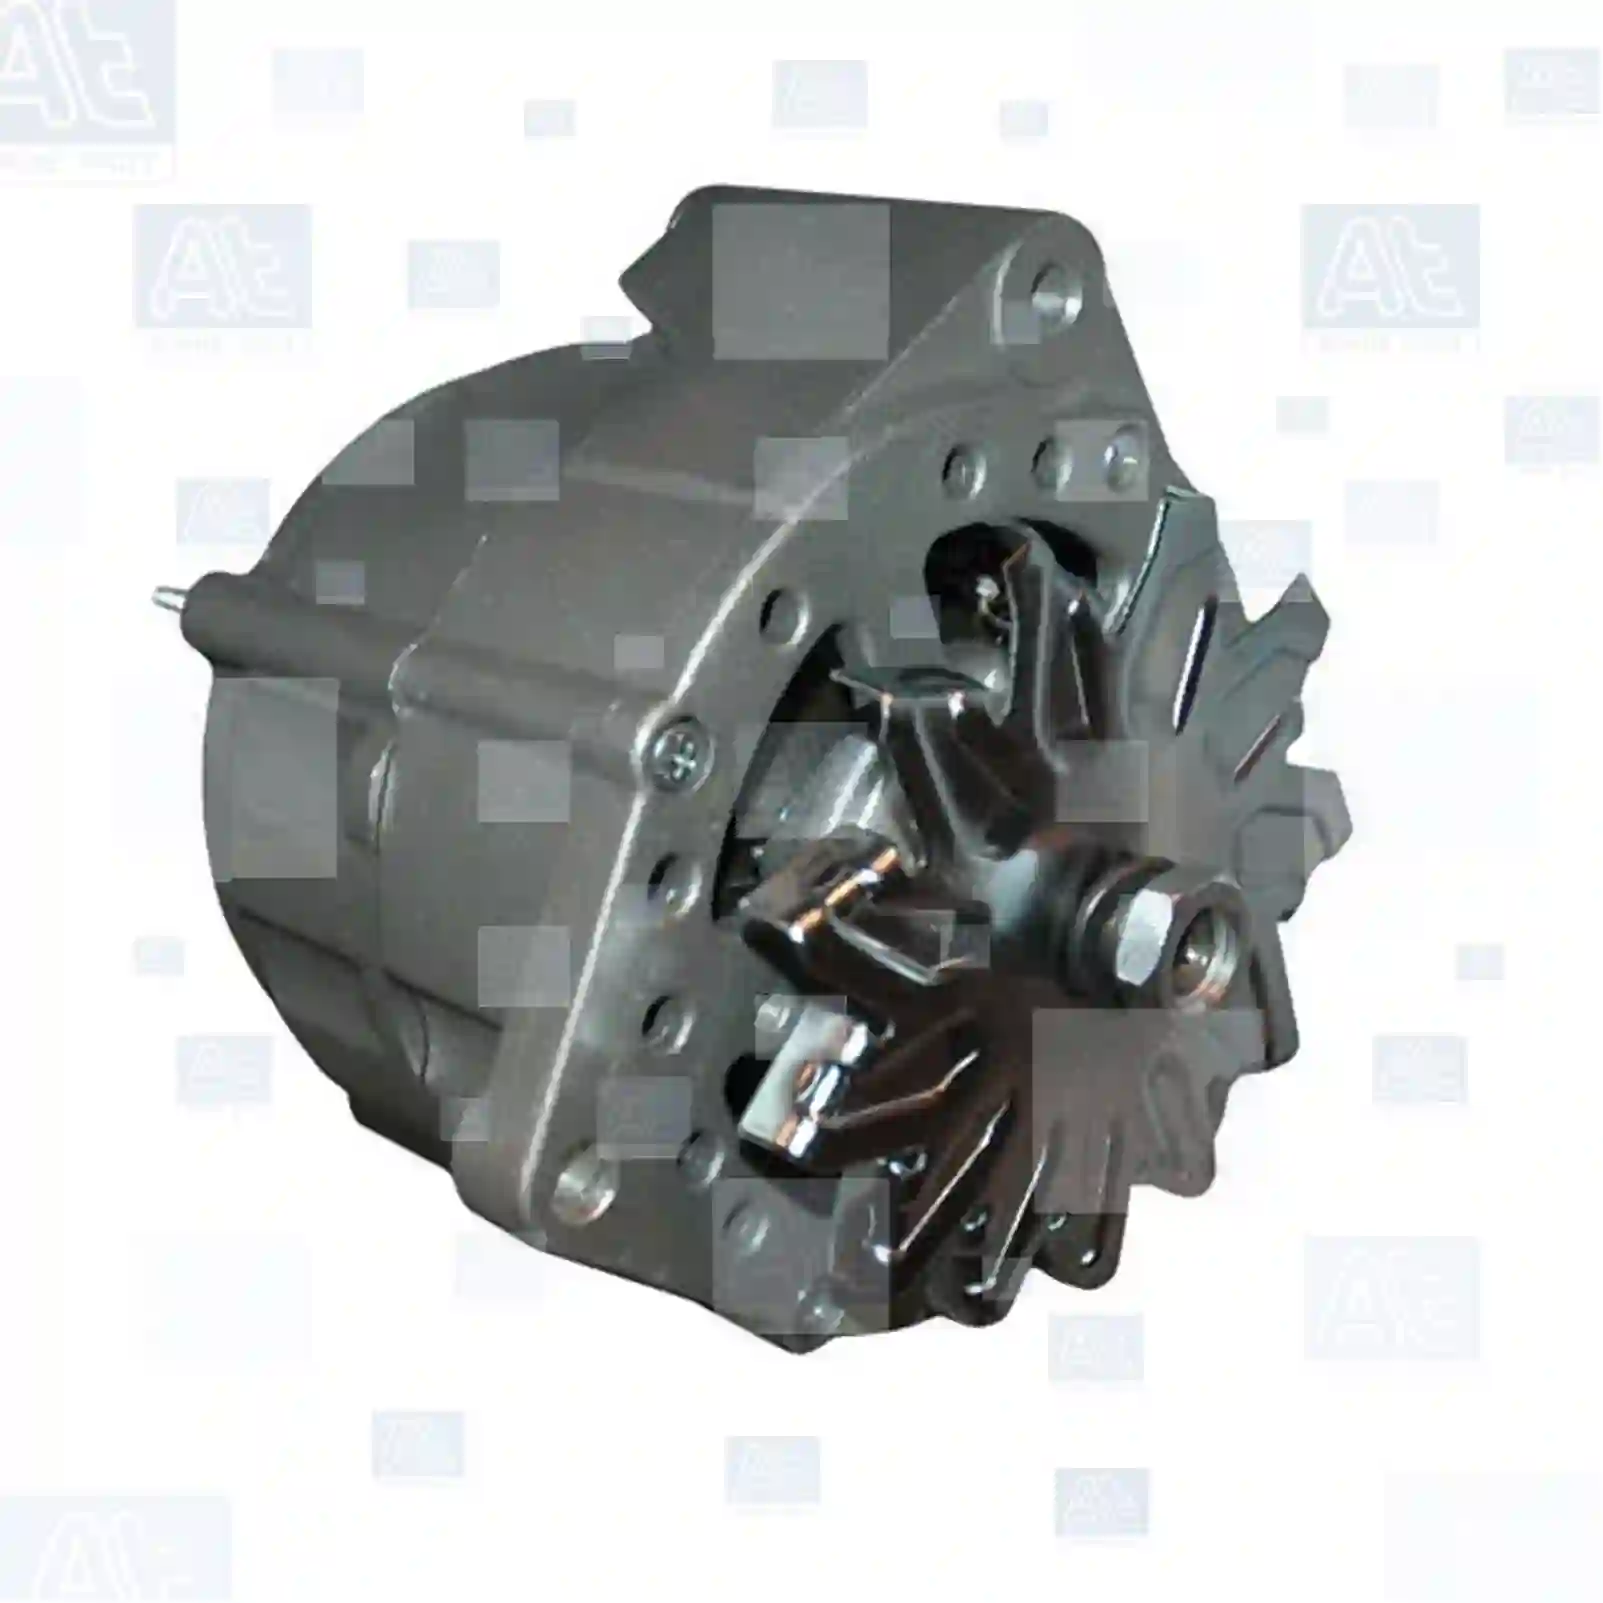 Alternator, without pulley, at no 77710000, oem no: 9019635901, 3255439, 0613097, 0854300, 0890775, 0894300, 1244492, 1244492A, 1244492R, 1274480, 1350515, 1350515A, 1350515R, 1357591, 1357591A, 1357591R, 1357592, 1516560, 1528595, 613097, 613097A, 613097R, 854300, 859232, 890775, 894300, AELD077, AMPC197, 01171461, 03040718, 1702103, 1702113, 9540702, 6002025, 6104058, 51261017119, 51261017123, 51261017144, 51261017184, 51261017185, 51261017201, 51261019123, 51261019144, 51261019185, 51261019201, 51262017185, 51262017201, 81261016018, 81261016027, 88261016001, 51261017201, 0051543402, 0061546802, 0071542702, 0091540702, 009154070280, 009154070287, 0101542002, 3661500750, 3661502050, 3761507050, 0101542002, 7421324000, 7421341000, 7421353000, 894300, ZG20247-0008 At Spare Part | Engine, Accelerator Pedal, Camshaft, Connecting Rod, Crankcase, Crankshaft, Cylinder Head, Engine Suspension Mountings, Exhaust Manifold, Exhaust Gas Recirculation, Filter Kits, Flywheel Housing, General Overhaul Kits, Engine, Intake Manifold, Oil Cleaner, Oil Cooler, Oil Filter, Oil Pump, Oil Sump, Piston & Liner, Sensor & Switch, Timing Case, Turbocharger, Cooling System, Belt Tensioner, Coolant Filter, Coolant Pipe, Corrosion Prevention Agent, Drive, Expansion Tank, Fan, Intercooler, Monitors & Gauges, Radiator, Thermostat, V-Belt / Timing belt, Water Pump, Fuel System, Electronical Injector Unit, Feed Pump, Fuel Filter, cpl., Fuel Gauge Sender,  Fuel Line, Fuel Pump, Fuel Tank, Injection Line Kit, Injection Pump, Exhaust System, Clutch & Pedal, Gearbox, Propeller Shaft, Axles, Brake System, Hubs & Wheels, Suspension, Leaf Spring, Universal Parts / Accessories, Steering, Electrical System, Cabin Alternator, without pulley, at no 77710000, oem no: 9019635901, 3255439, 0613097, 0854300, 0890775, 0894300, 1244492, 1244492A, 1244492R, 1274480, 1350515, 1350515A, 1350515R, 1357591, 1357591A, 1357591R, 1357592, 1516560, 1528595, 613097, 613097A, 613097R, 854300, 859232, 890775, 894300, AELD077, AMPC197, 01171461, 03040718, 1702103, 1702113, 9540702, 6002025, 6104058, 51261017119, 51261017123, 51261017144, 51261017184, 51261017185, 51261017201, 51261019123, 51261019144, 51261019185, 51261019201, 51262017185, 51262017201, 81261016018, 81261016027, 88261016001, 51261017201, 0051543402, 0061546802, 0071542702, 0091540702, 009154070280, 009154070287, 0101542002, 3661500750, 3661502050, 3761507050, 0101542002, 7421324000, 7421341000, 7421353000, 894300, ZG20247-0008 At Spare Part | Engine, Accelerator Pedal, Camshaft, Connecting Rod, Crankcase, Crankshaft, Cylinder Head, Engine Suspension Mountings, Exhaust Manifold, Exhaust Gas Recirculation, Filter Kits, Flywheel Housing, General Overhaul Kits, Engine, Intake Manifold, Oil Cleaner, Oil Cooler, Oil Filter, Oil Pump, Oil Sump, Piston & Liner, Sensor & Switch, Timing Case, Turbocharger, Cooling System, Belt Tensioner, Coolant Filter, Coolant Pipe, Corrosion Prevention Agent, Drive, Expansion Tank, Fan, Intercooler, Monitors & Gauges, Radiator, Thermostat, V-Belt / Timing belt, Water Pump, Fuel System, Electronical Injector Unit, Feed Pump, Fuel Filter, cpl., Fuel Gauge Sender,  Fuel Line, Fuel Pump, Fuel Tank, Injection Line Kit, Injection Pump, Exhaust System, Clutch & Pedal, Gearbox, Propeller Shaft, Axles, Brake System, Hubs & Wheels, Suspension, Leaf Spring, Universal Parts / Accessories, Steering, Electrical System, Cabin